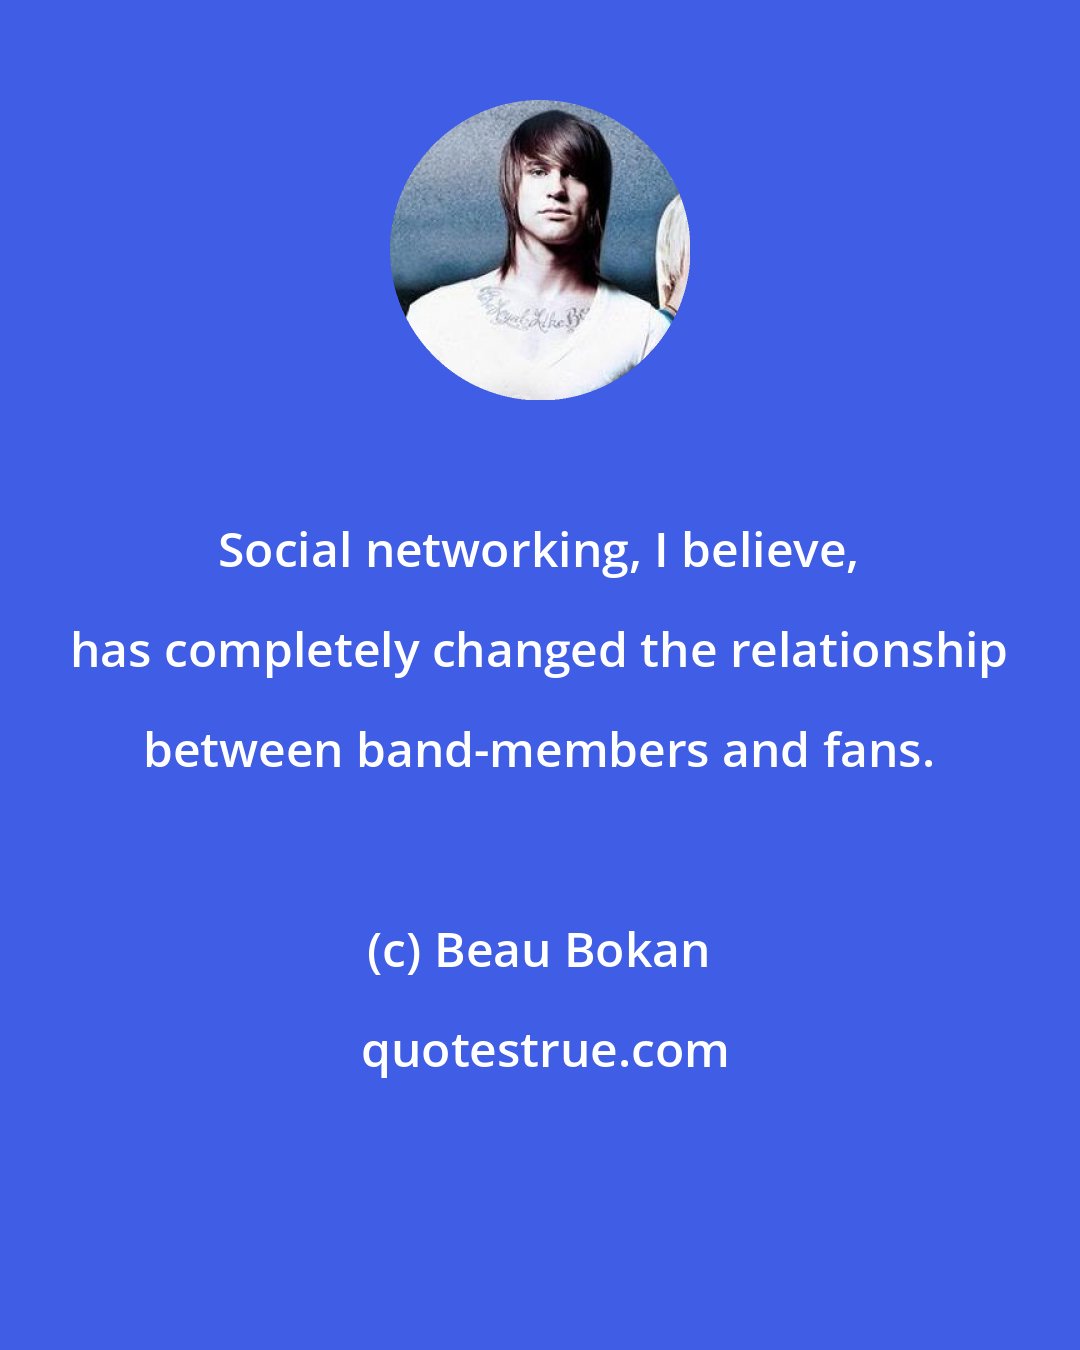 Beau Bokan: Social networking, I believe, has completely changed the relationship between band-members and fans.